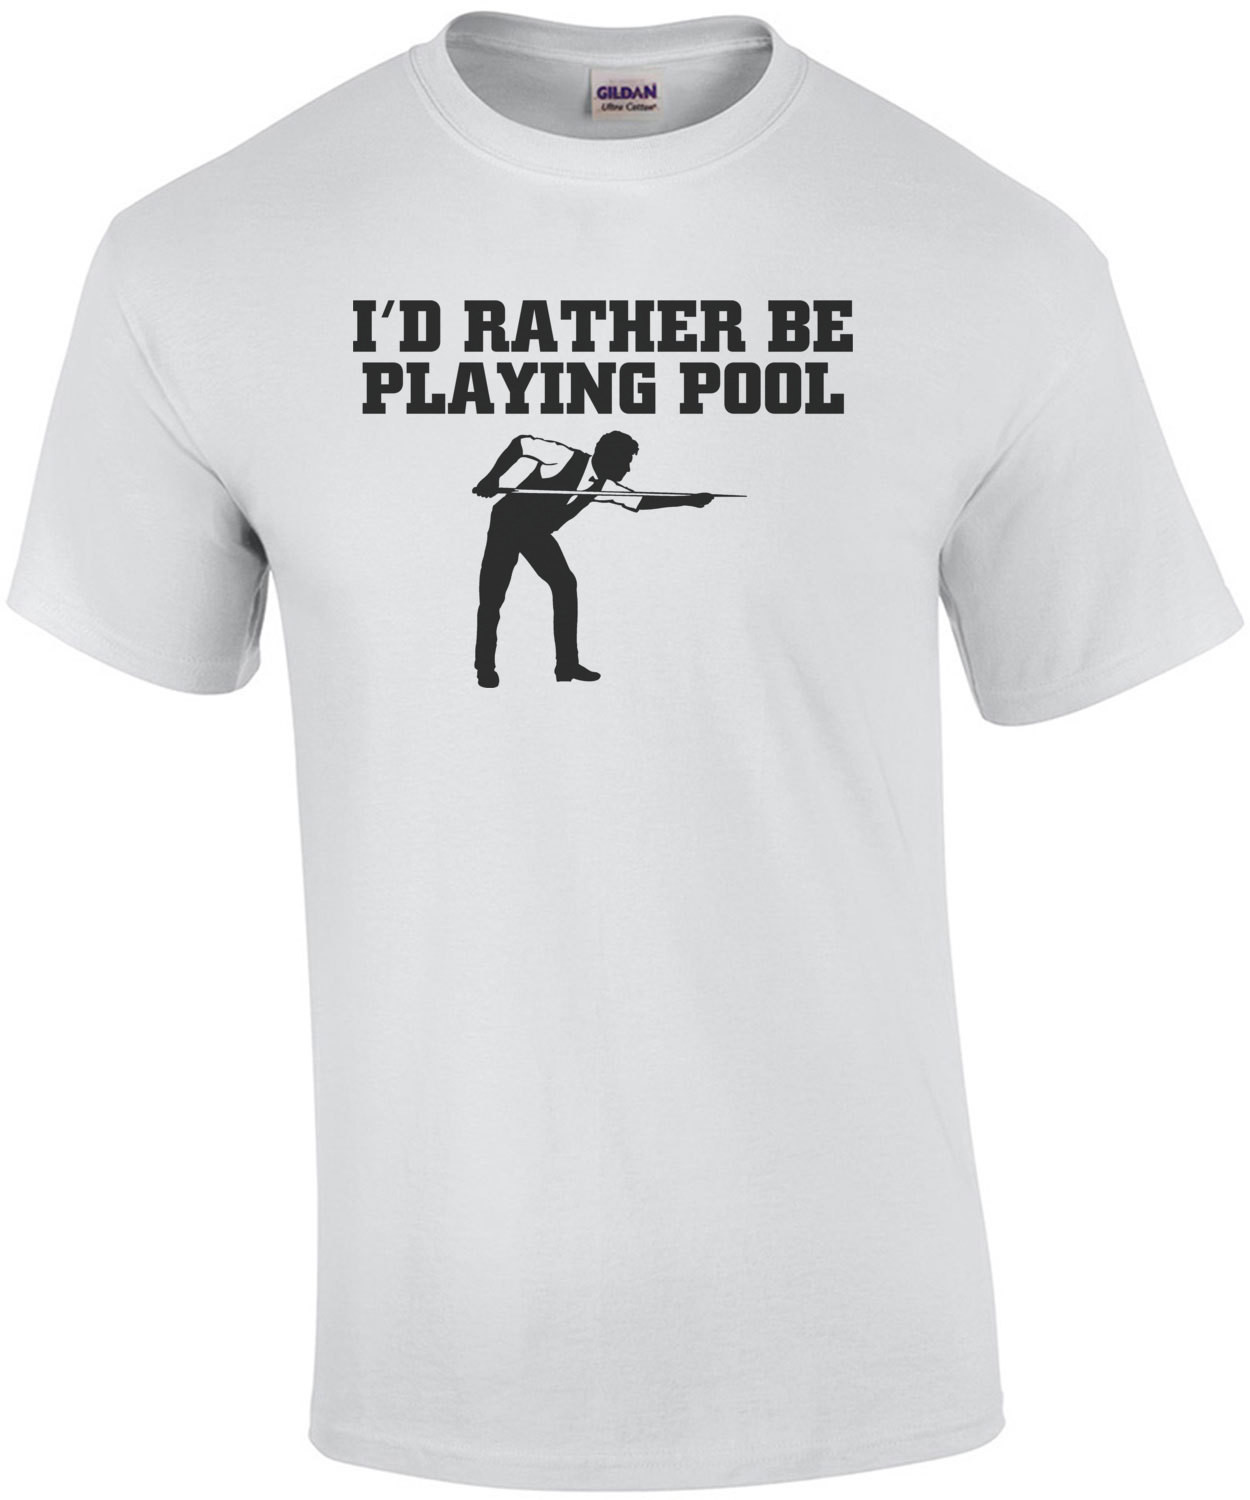 I'd Rather Be Playing Pool T-Shirt